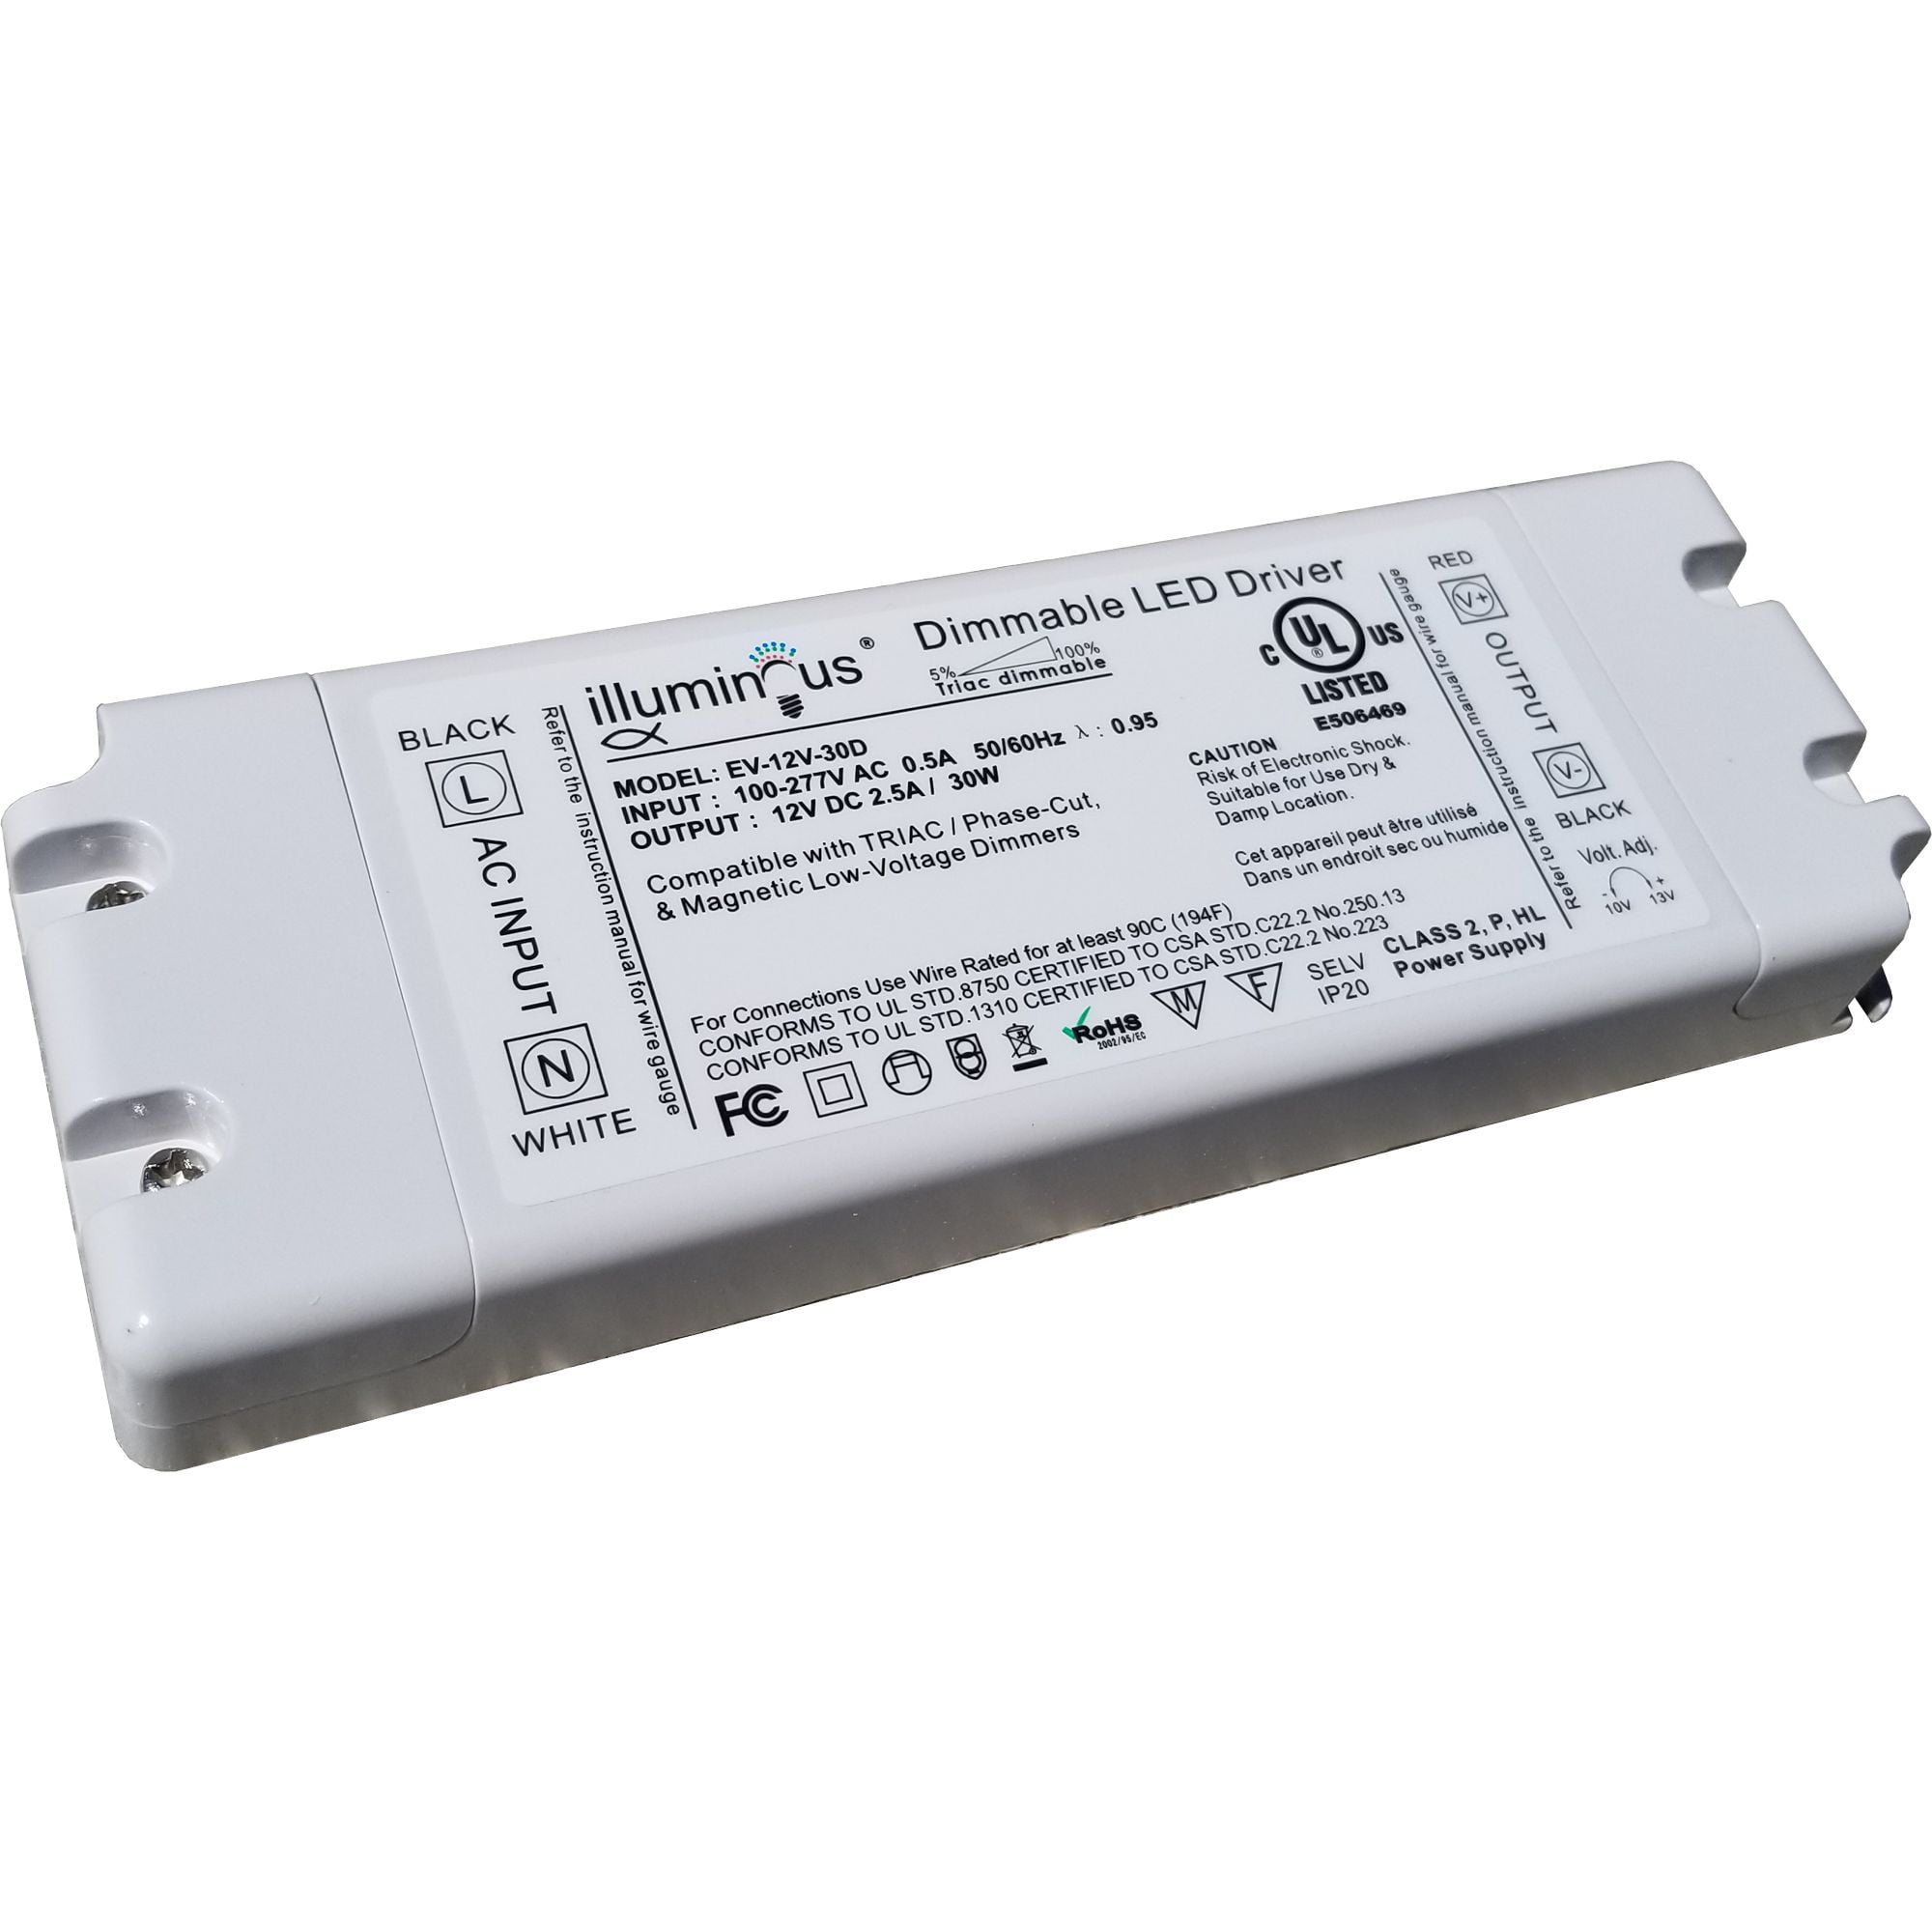 12V 30W Dimmable CV DC LED Driver UL approved